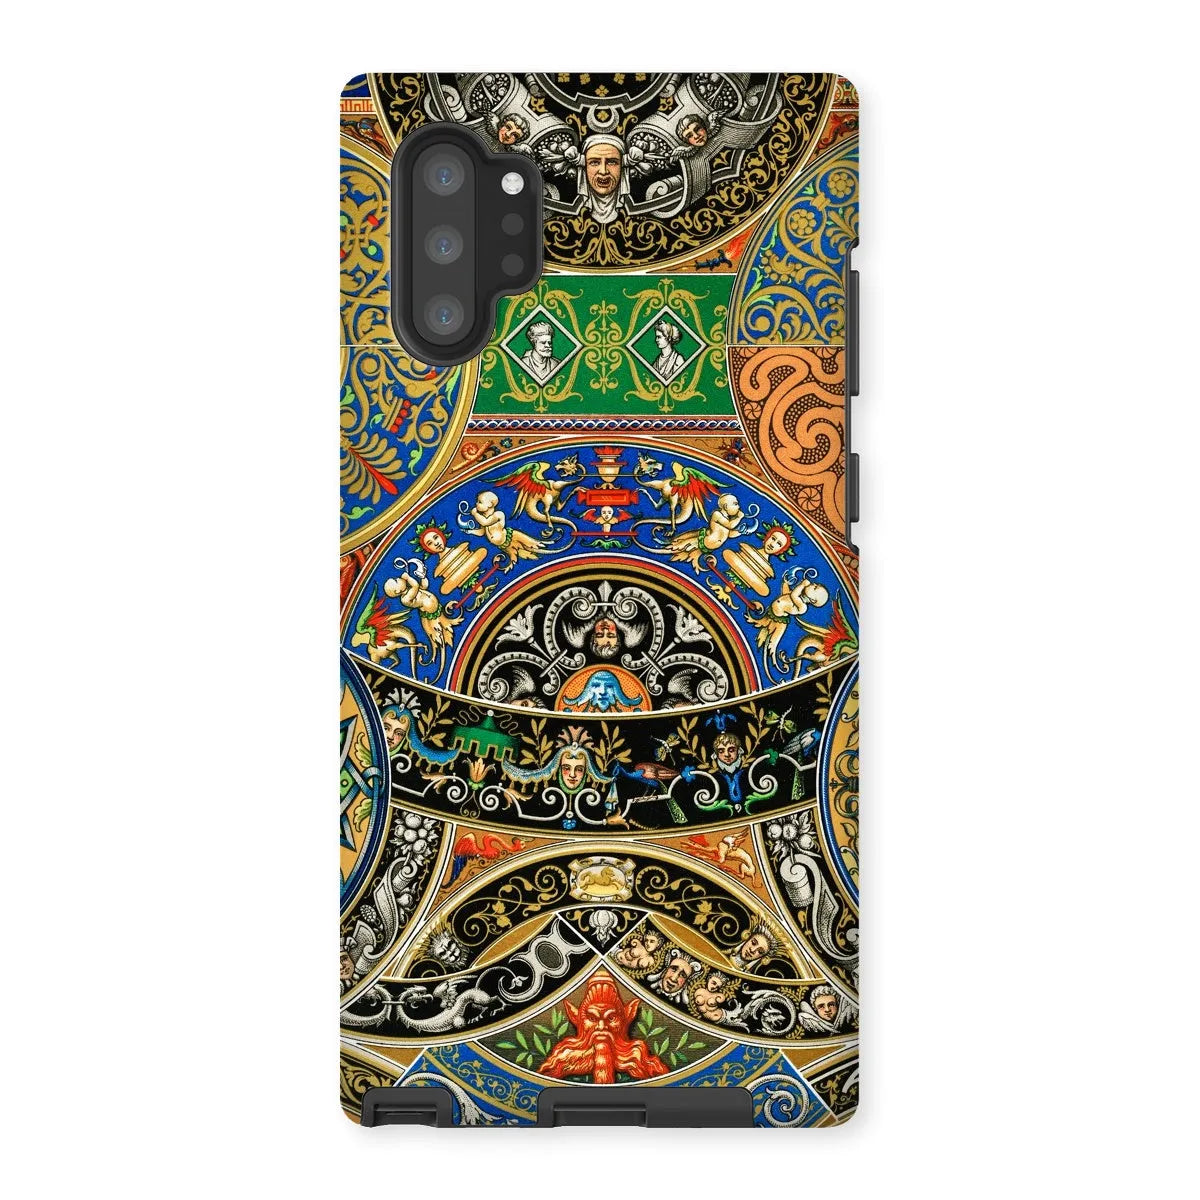 Renaissance Pattern 2 By Auguste Racinet Tough Phone Case - Samsung Galaxy Note 10p / Gloss - Mobile Phone Cases